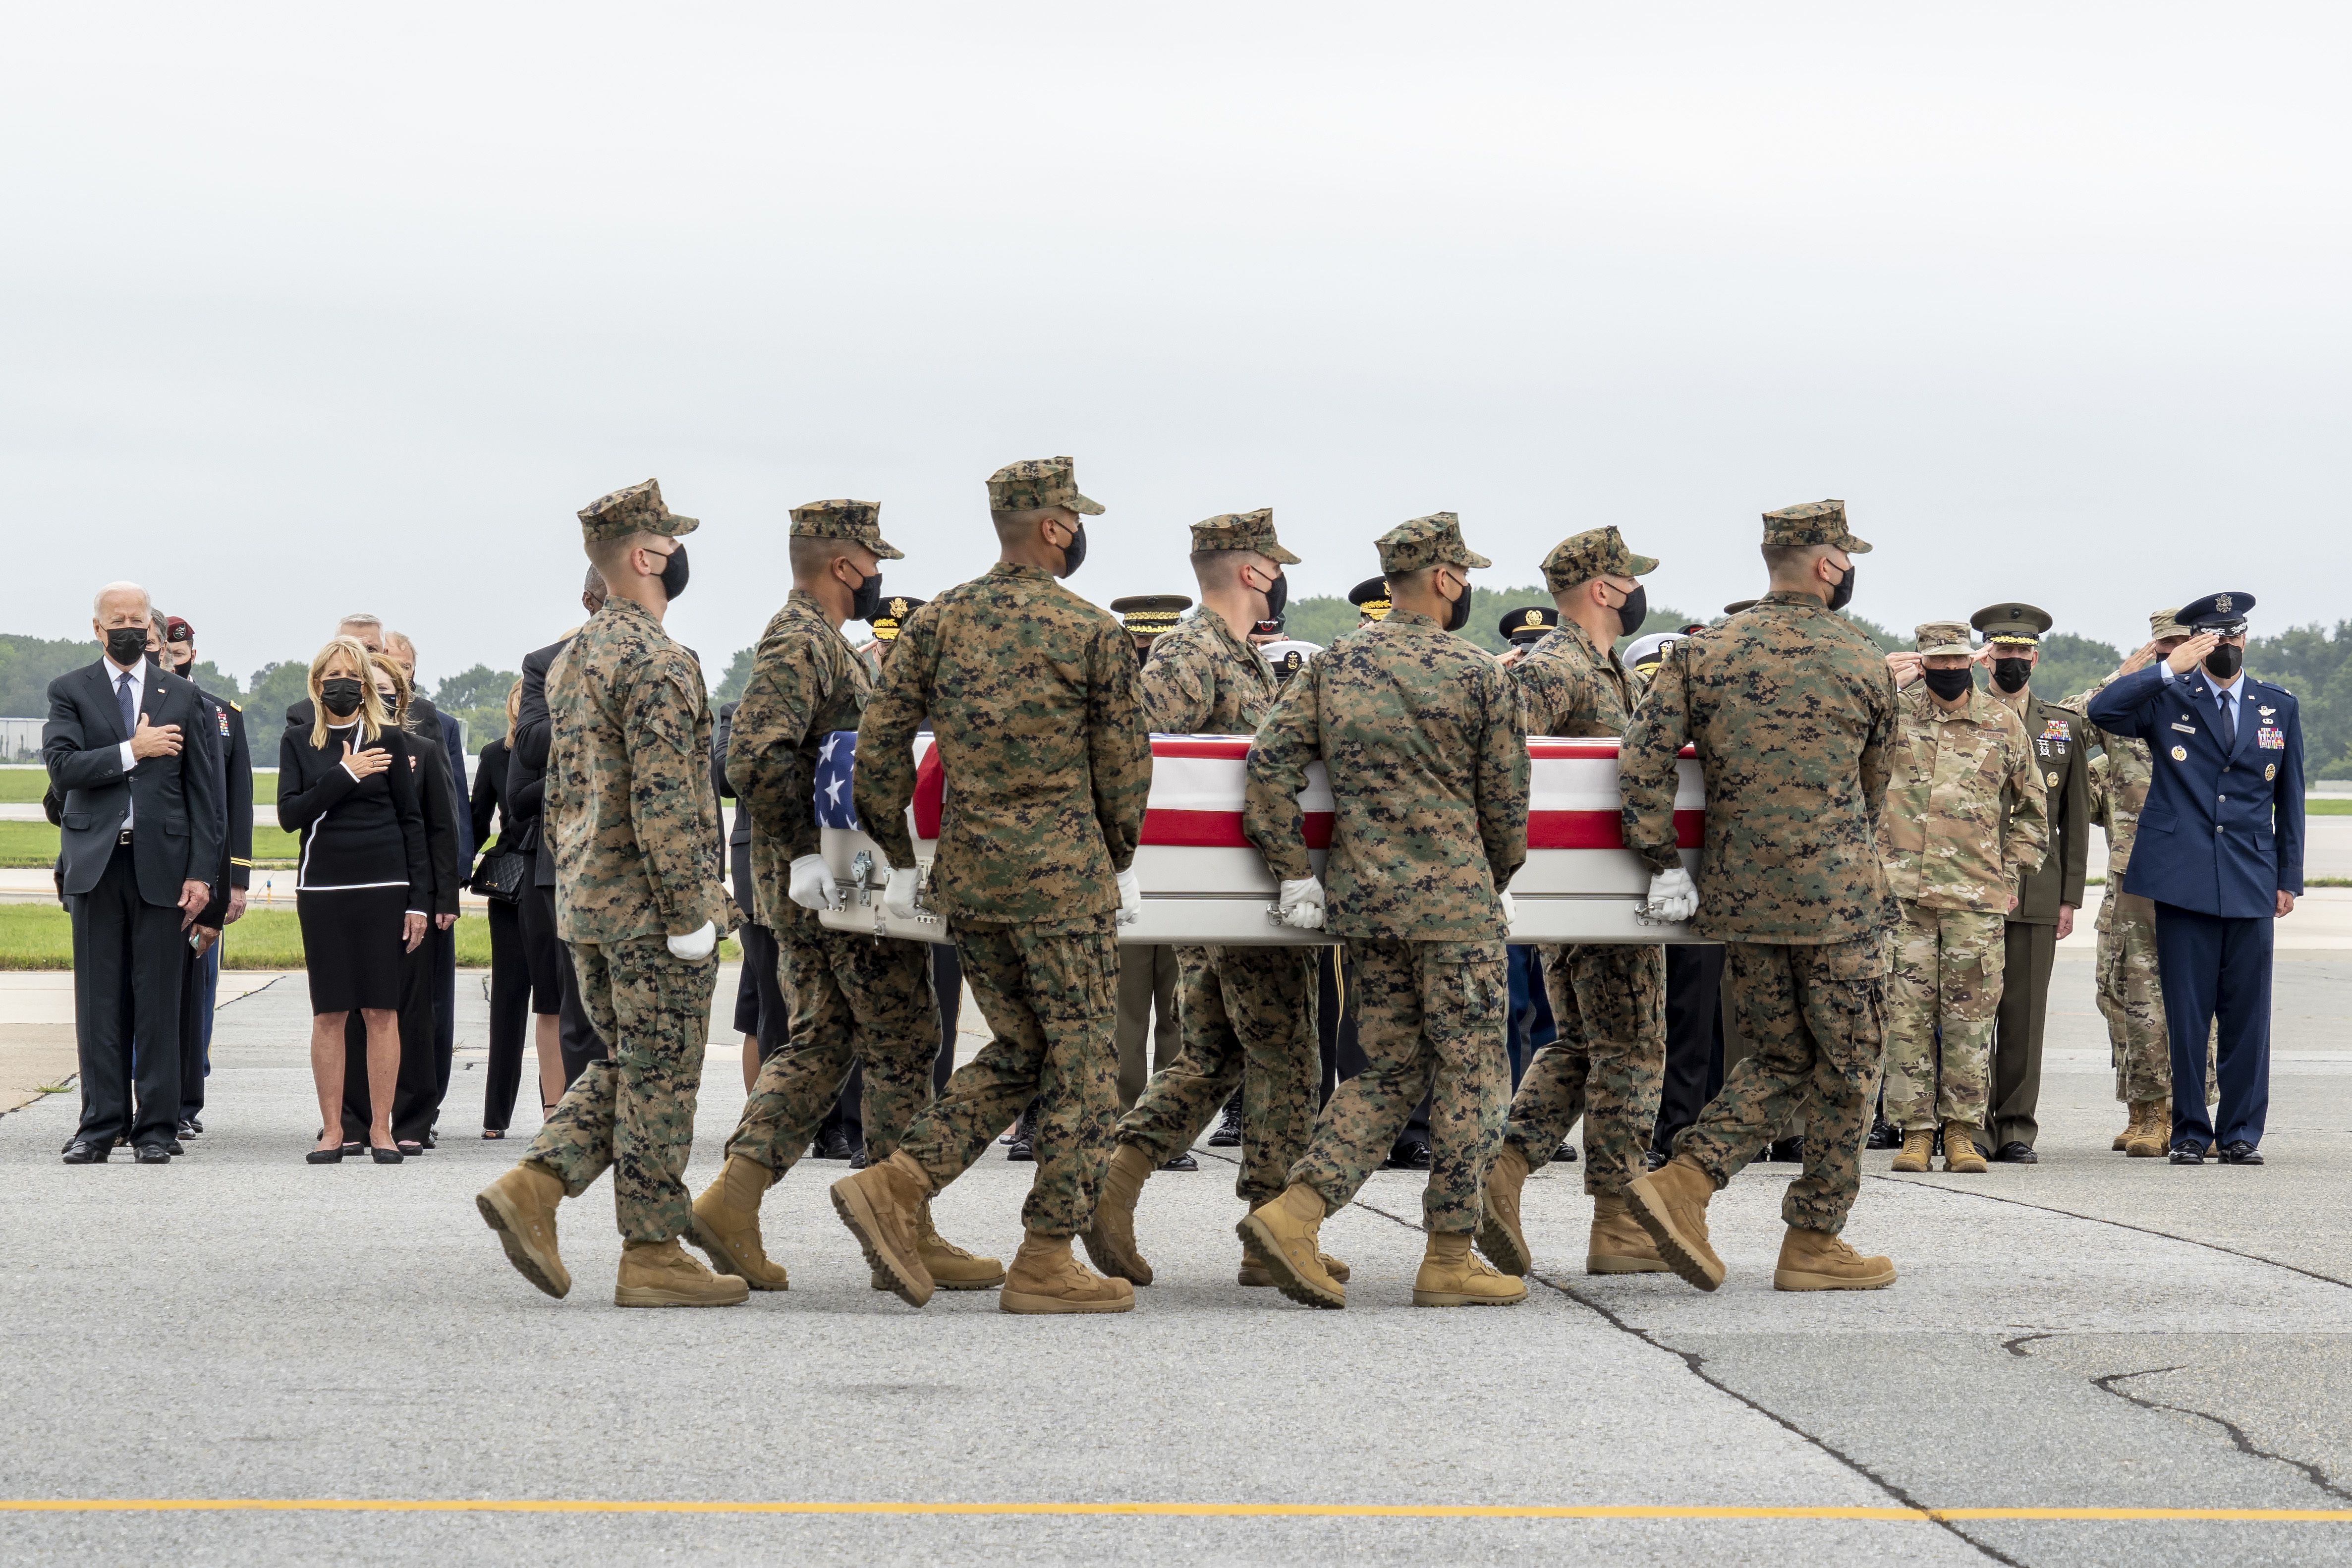  A U.S. Marine Corps carry team transfers the remains of Marine Corps Cpl. Daegan W. Page, who was killed in the 2021 Kabul Airport blast.